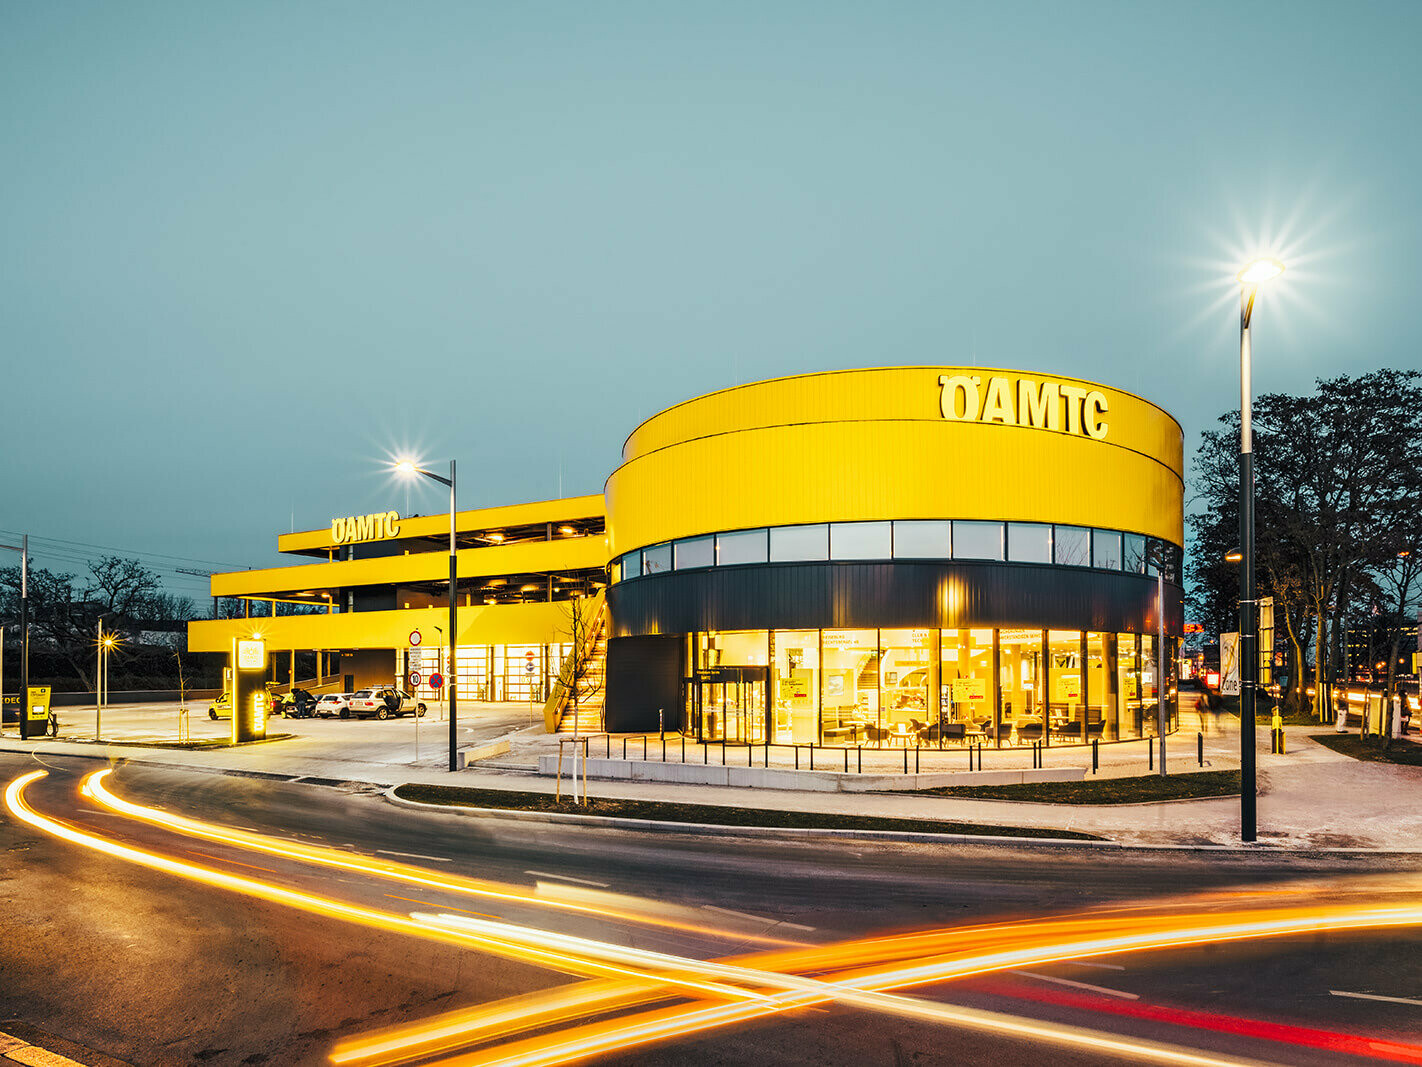 The ÖAMTC Center in Vienna by night. The building is covered in PREFA Sidings in the colour rapeseed yellow.